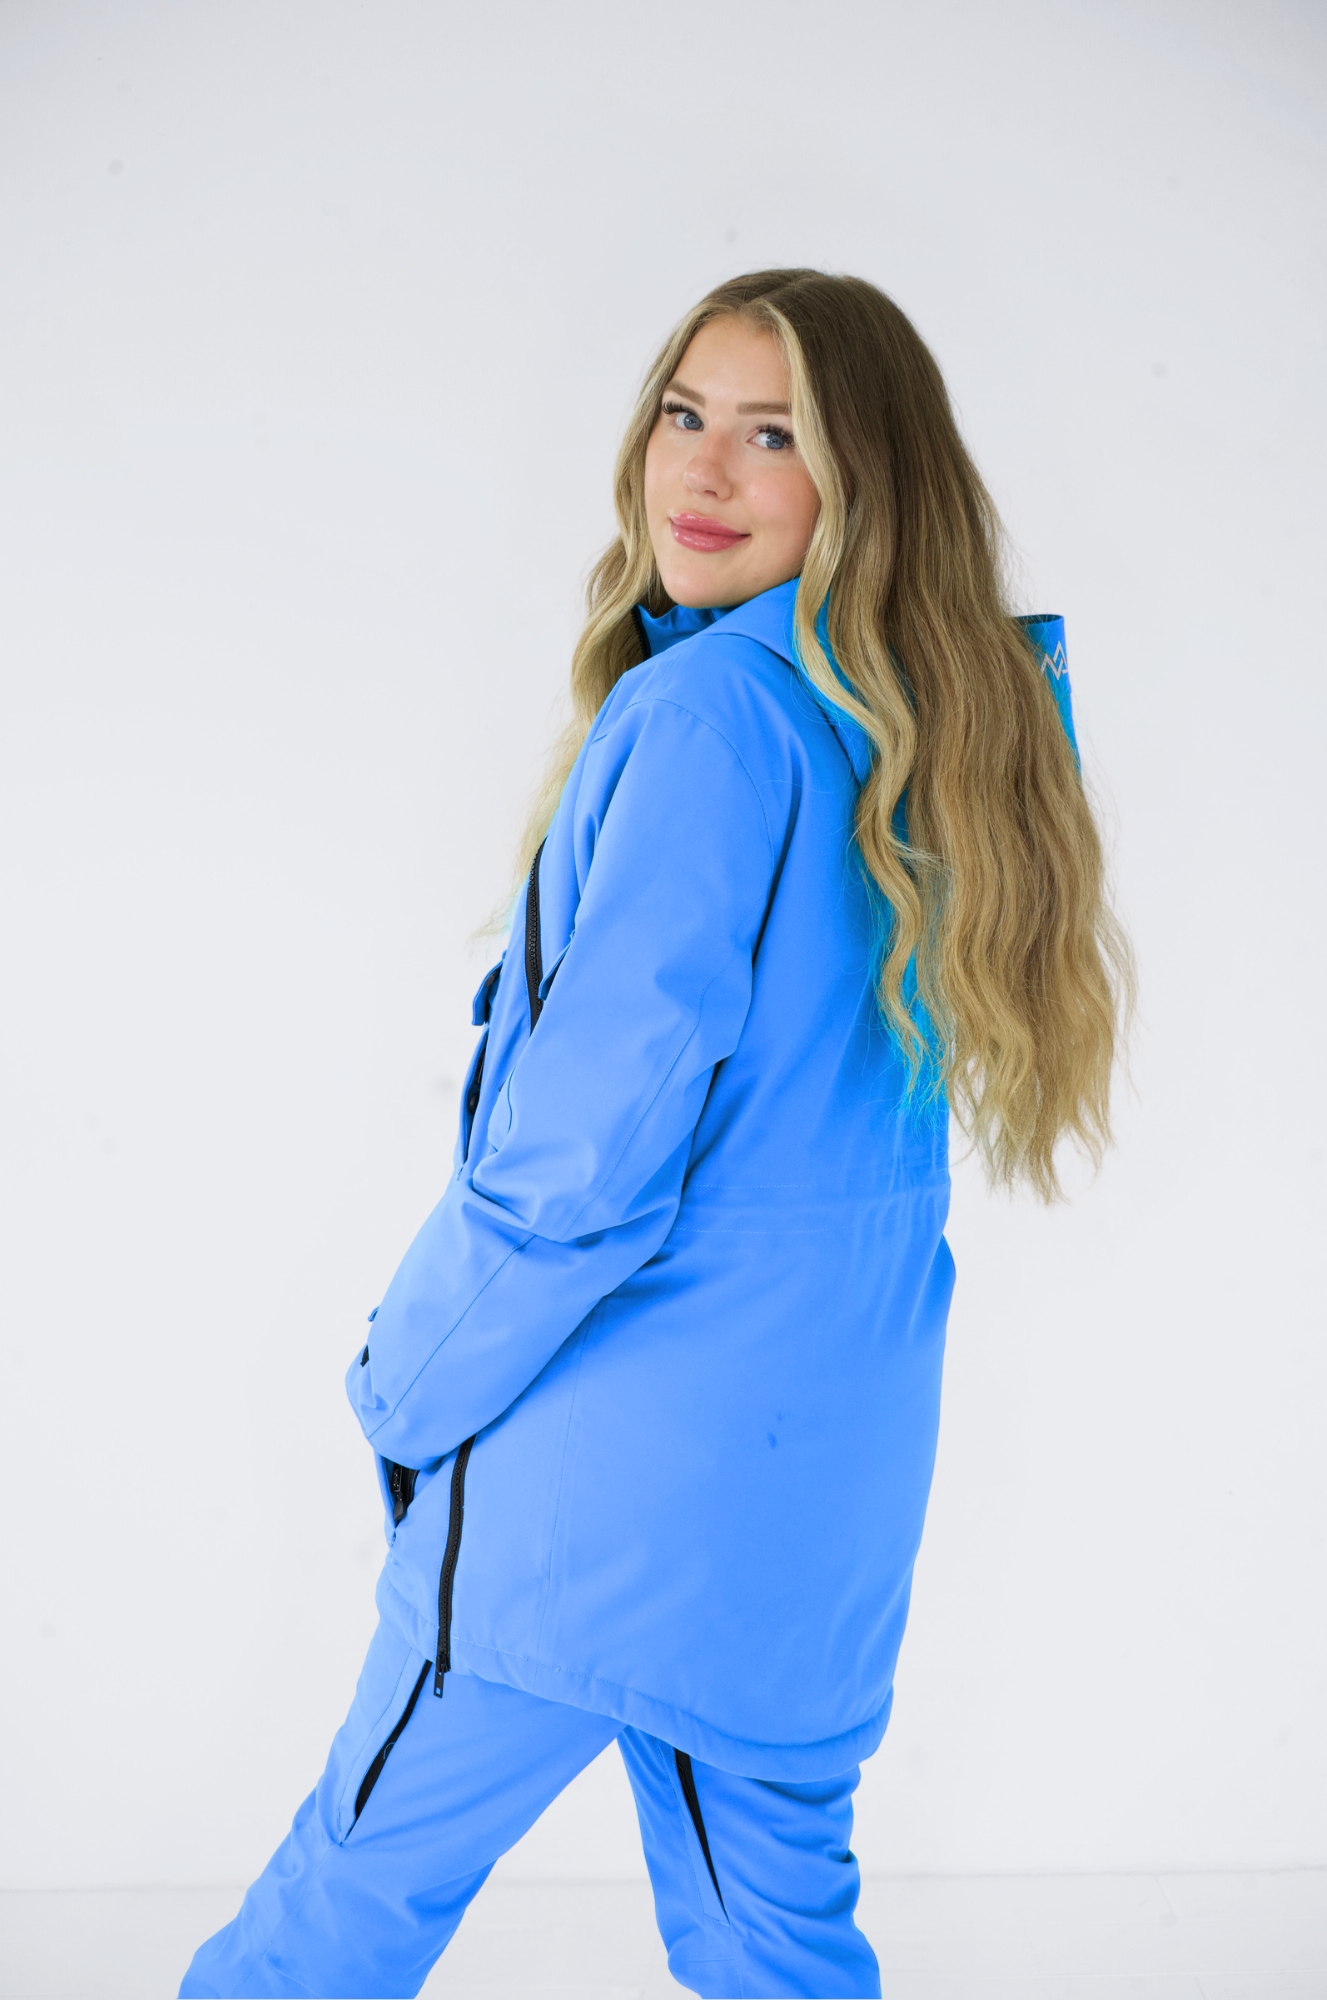 Woman standing sideways in a complete Nexarina blue snowboarding outfit, showcasing the fit and style of the jacket and pants.